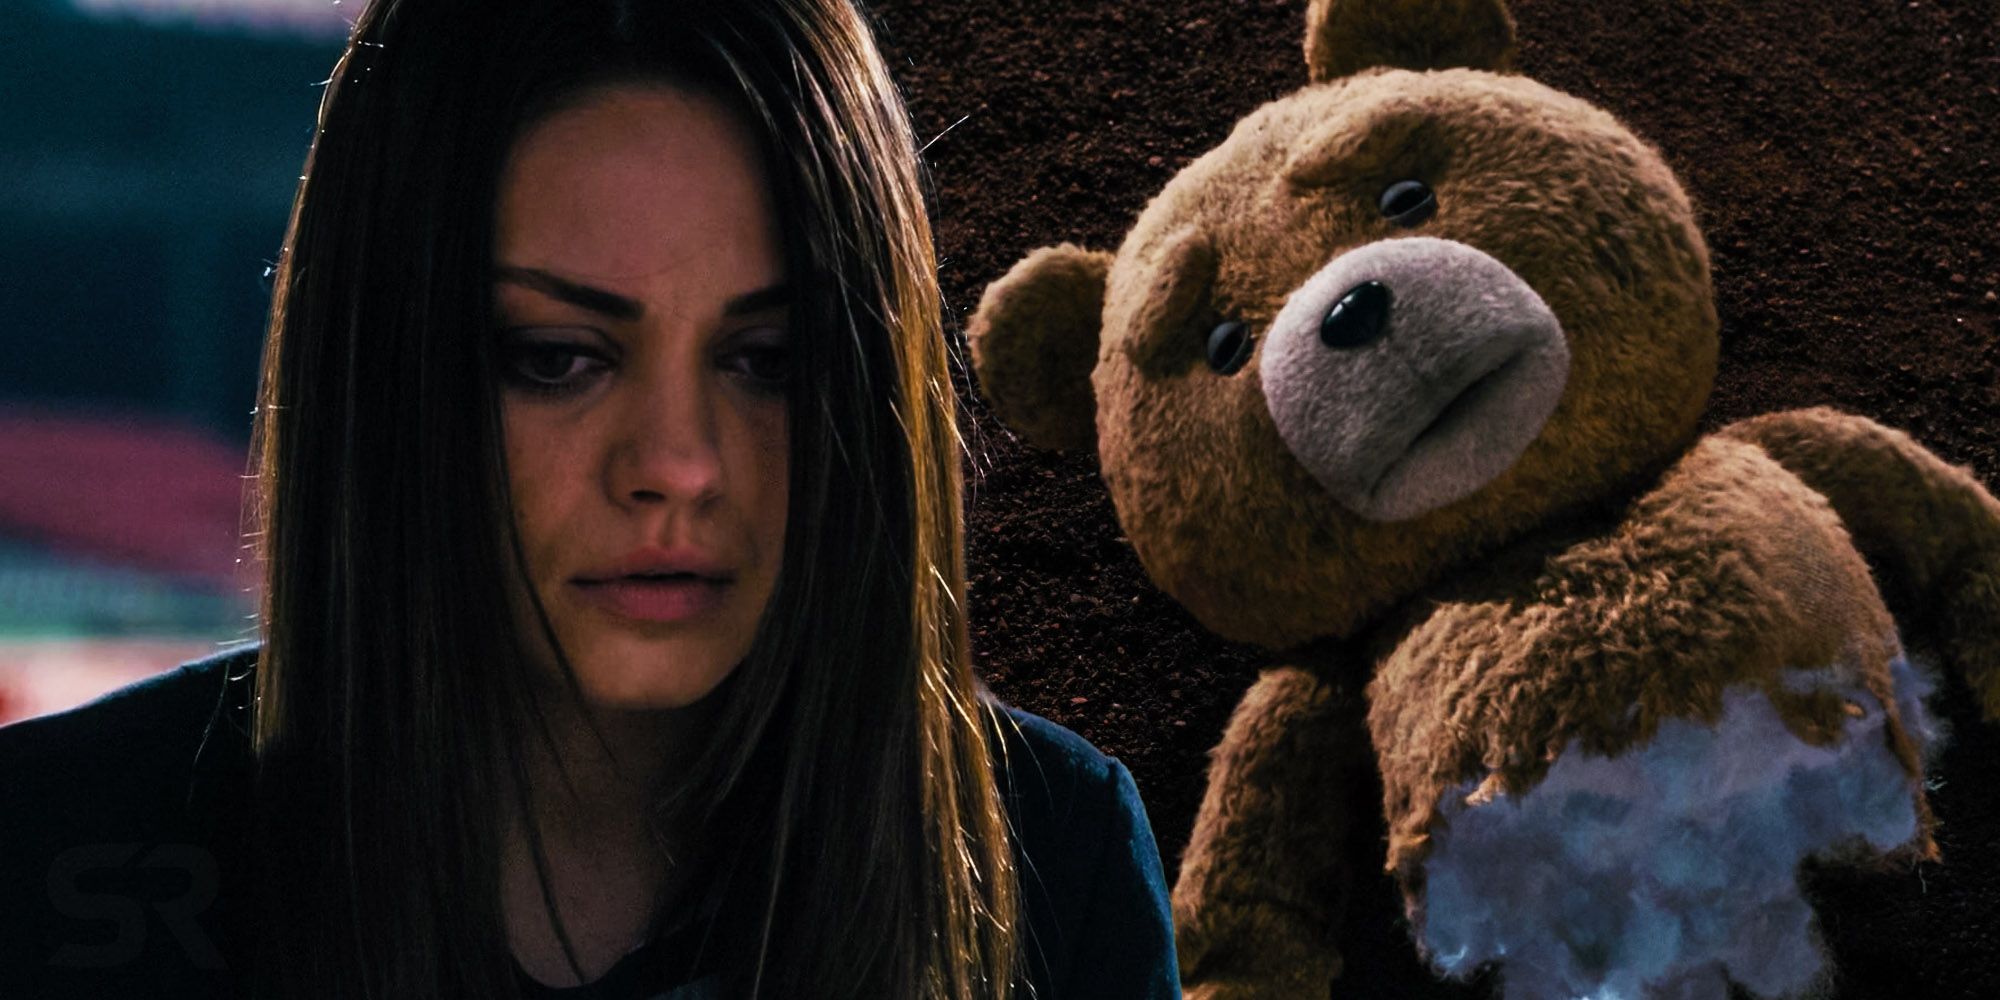 A collage of a dying Ted and Mila Kunis